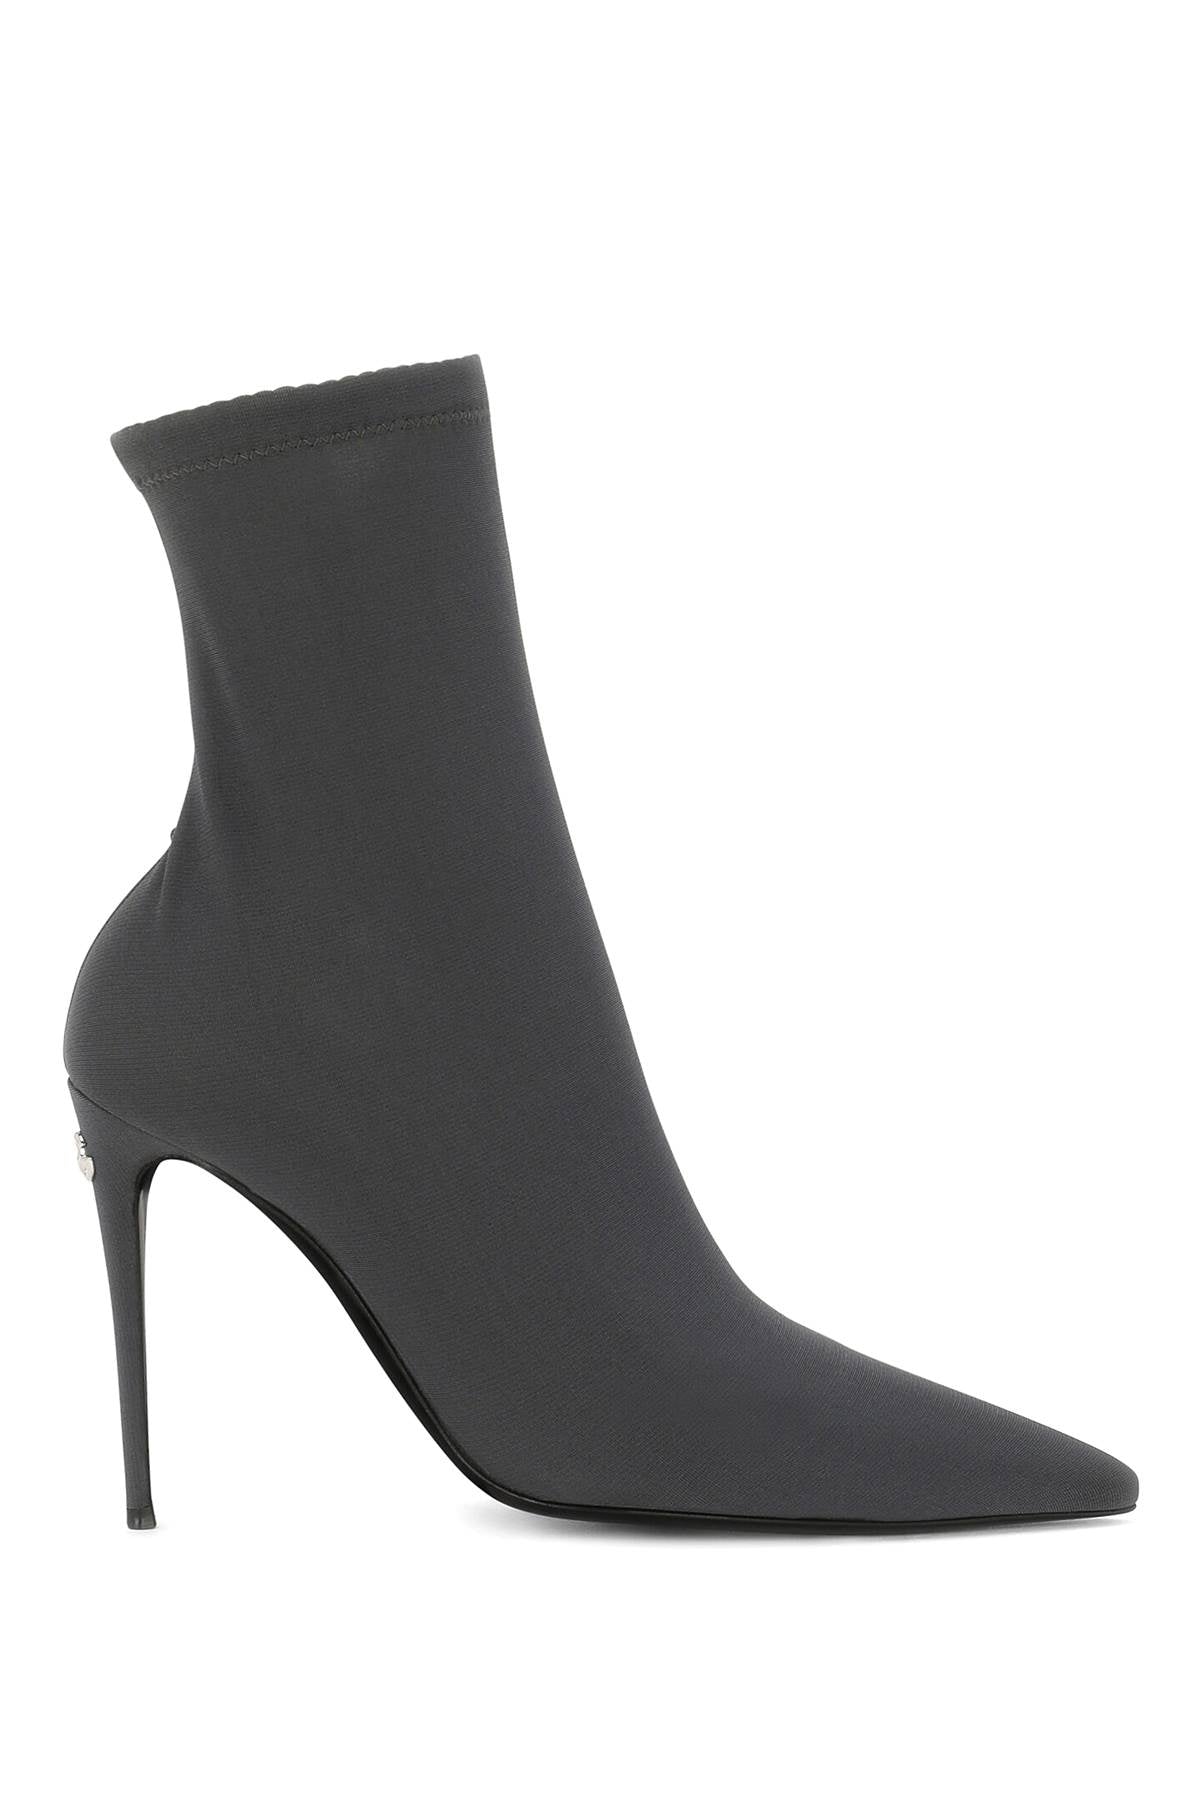 Dolce & gabbana stretch jersey ankle boots-0